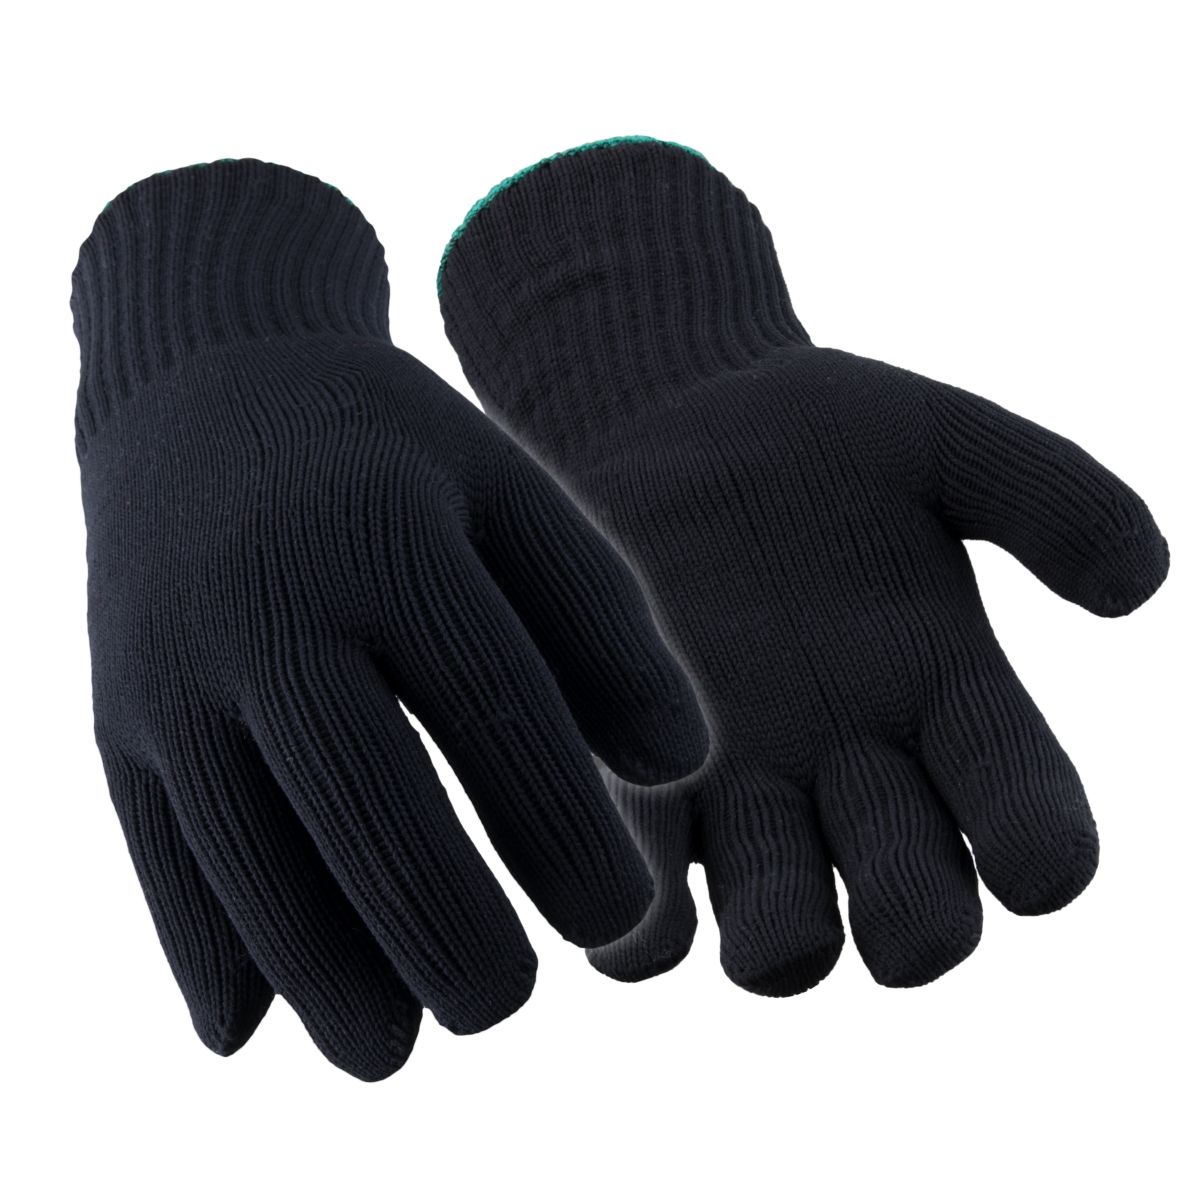 Men's Warm Dual Layer Knit Gloves with Soft Built-In Liner (Pack of 12 Pairs) - Black